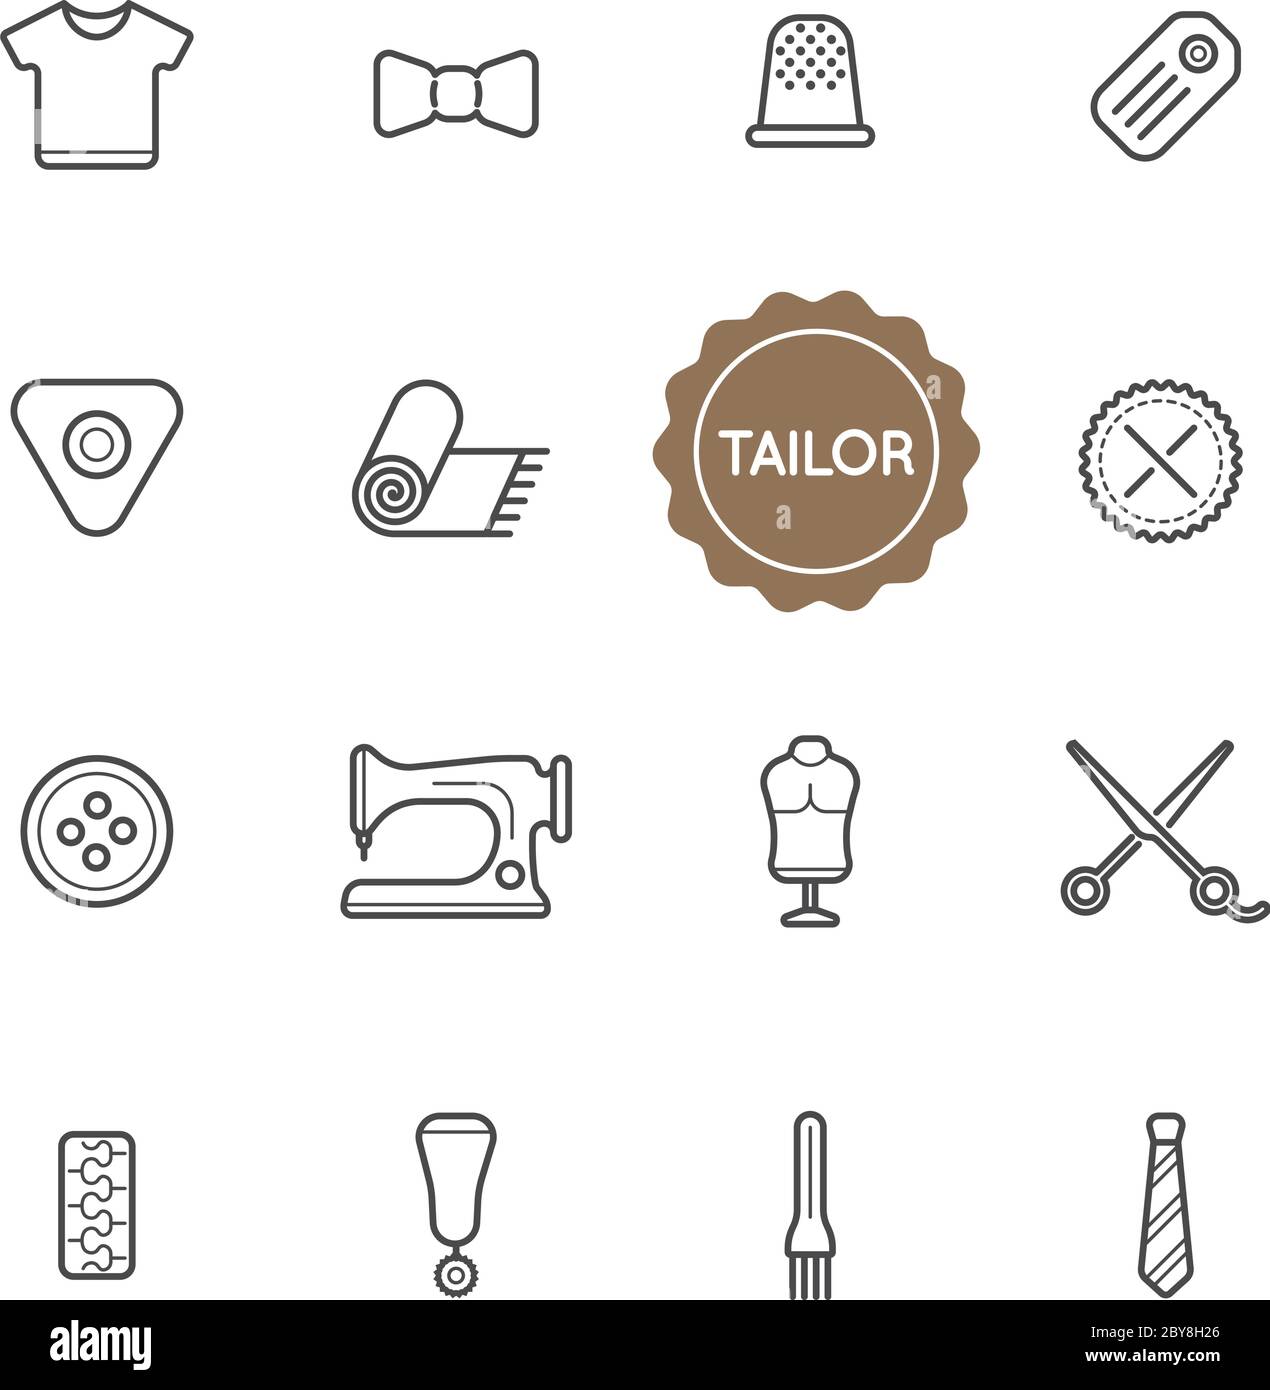 Set of Tailor Vector Illustration Elements can be used as Logo or Icon in premium quality Stock Vector